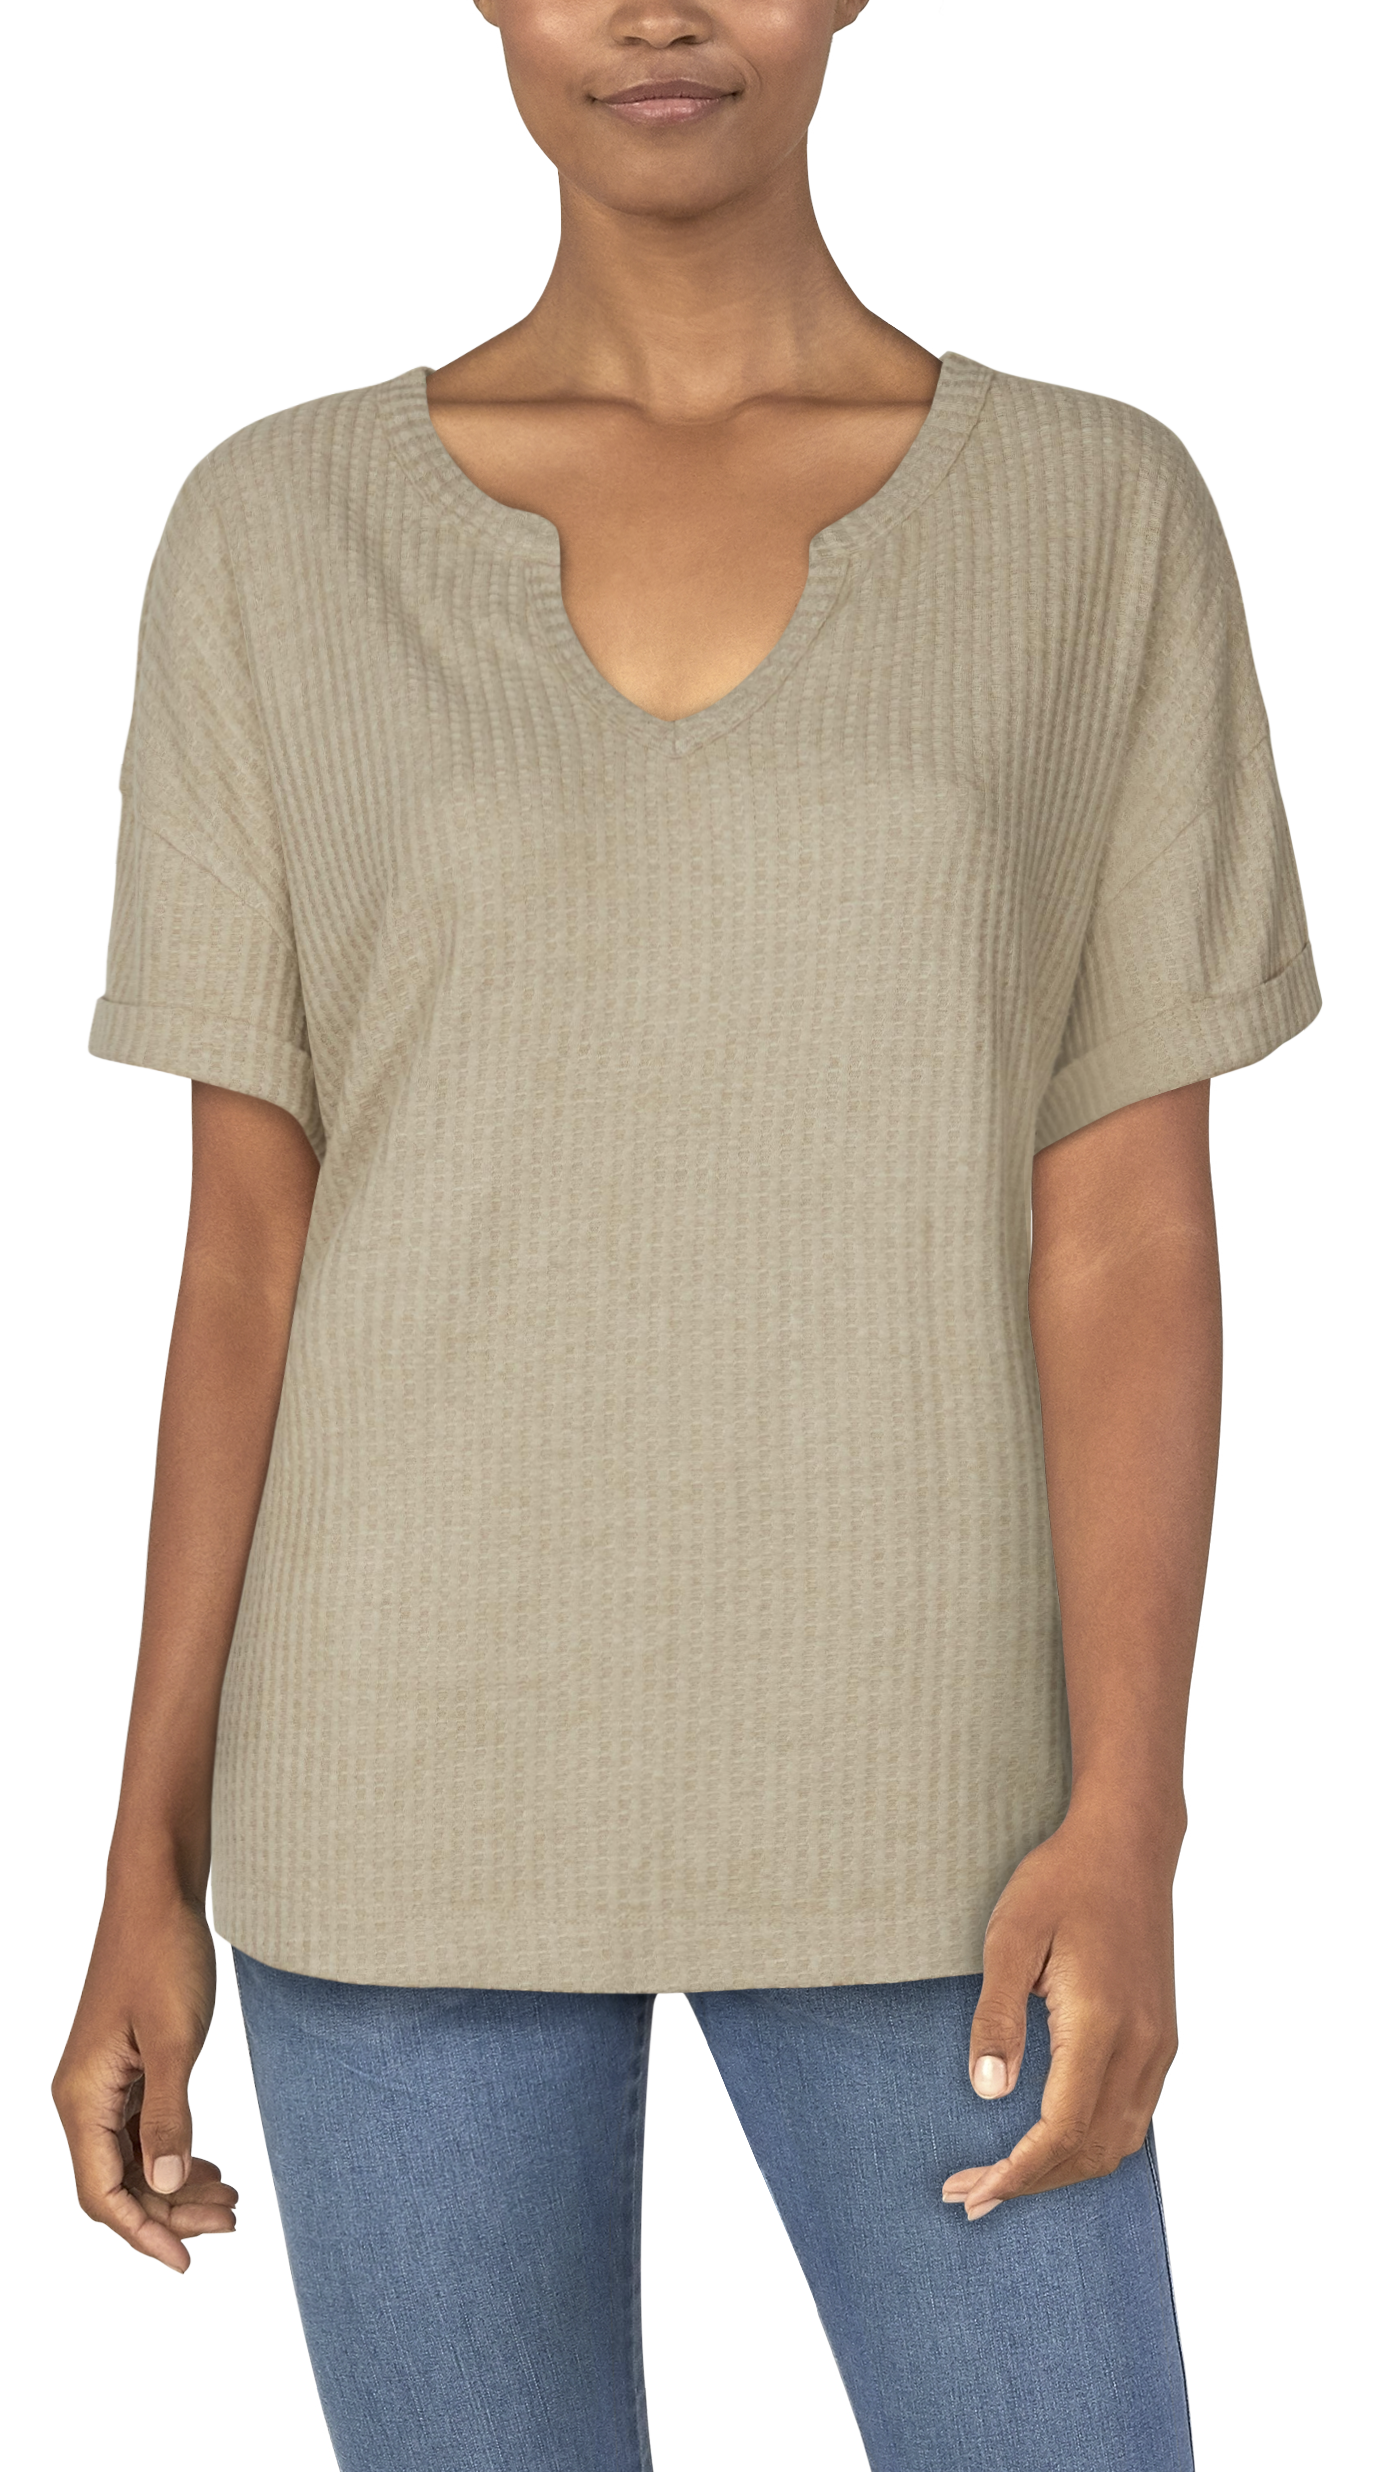 Natural Reflections Brush Creek Waffle Short-Sleeve Shirt for Ladies - Oatmeal Heather - 1X